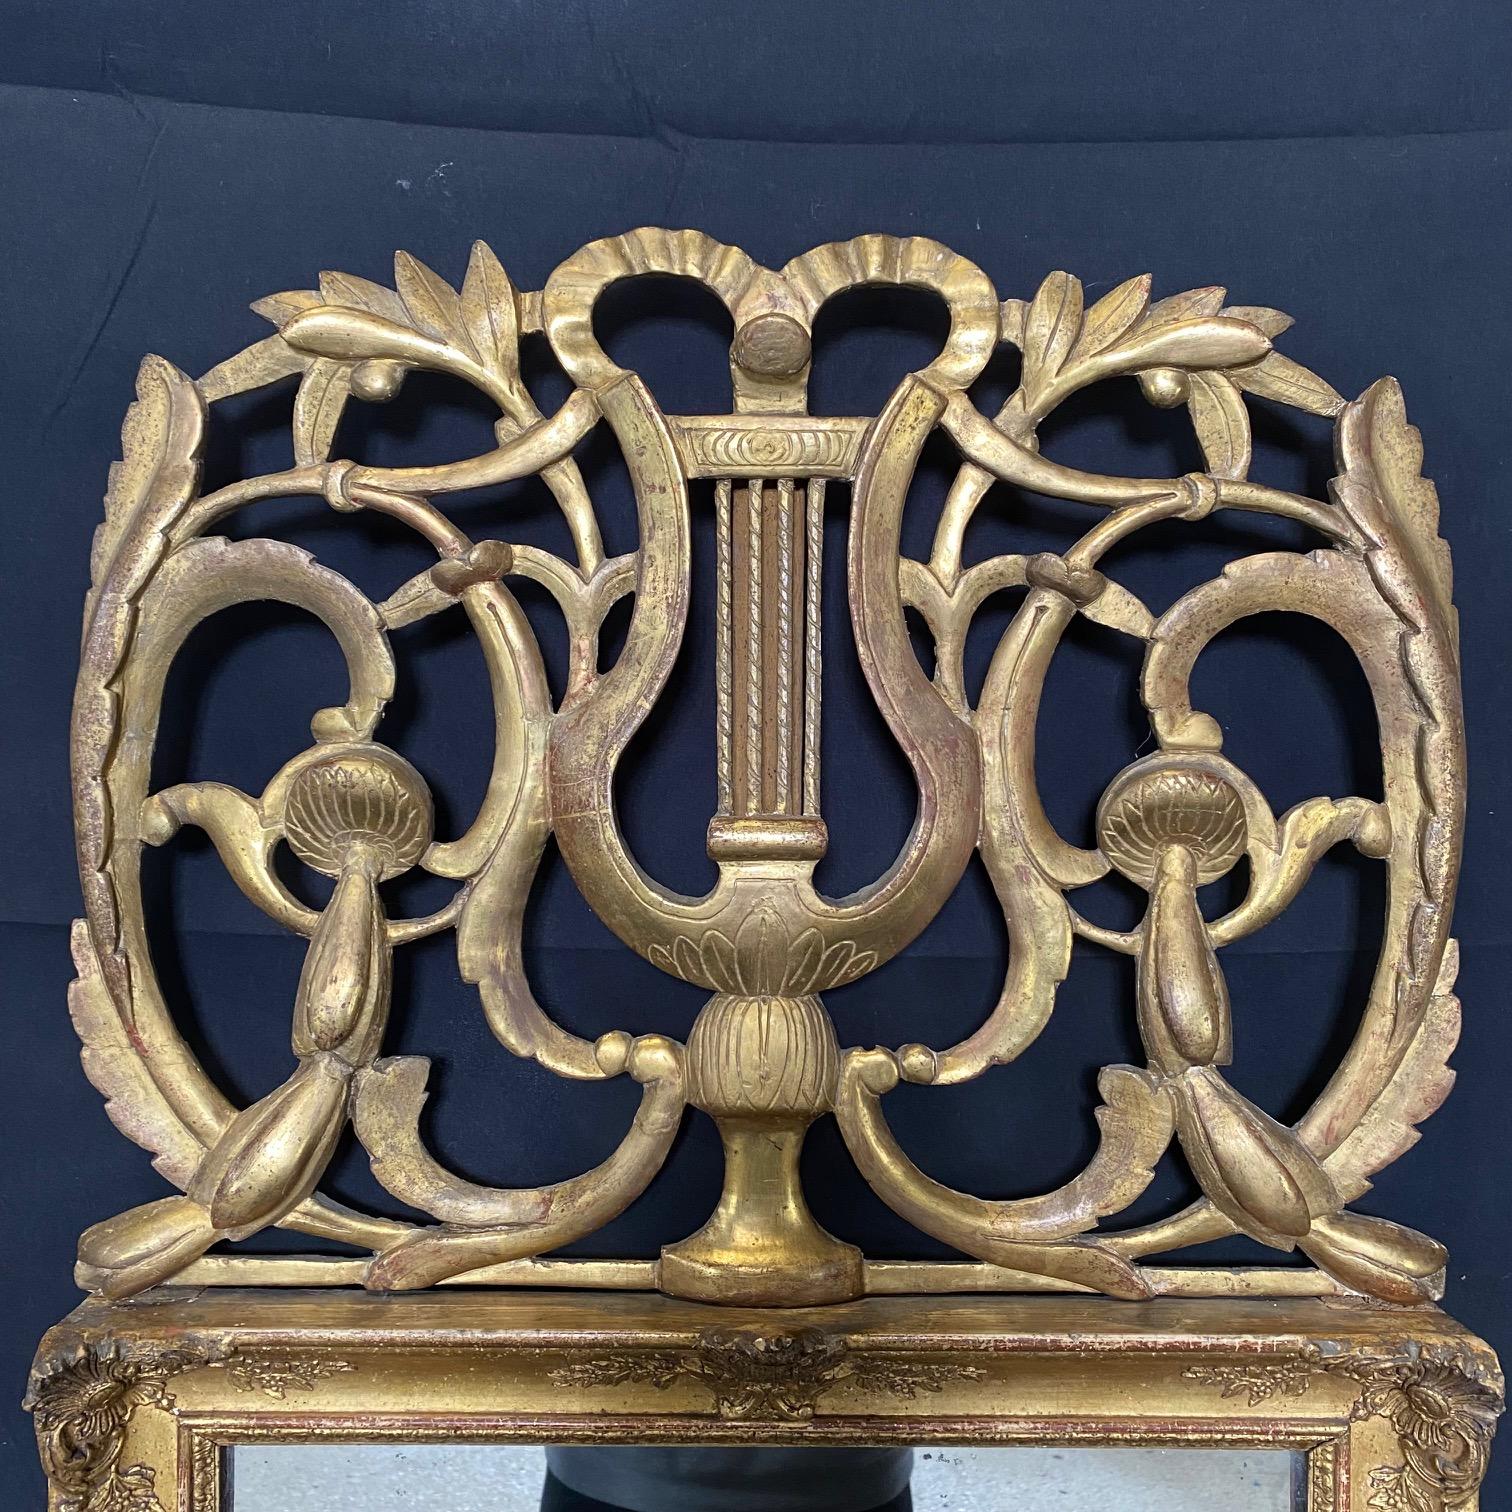 Rare form of a Louis XVI French mirror made of hand carved gold gilded wood with a fronton that features a lovely harp or lyre, floral motifs, and laurel wreath. 
# 6160
Measures : Mirror is 16.25 w 19 h

.